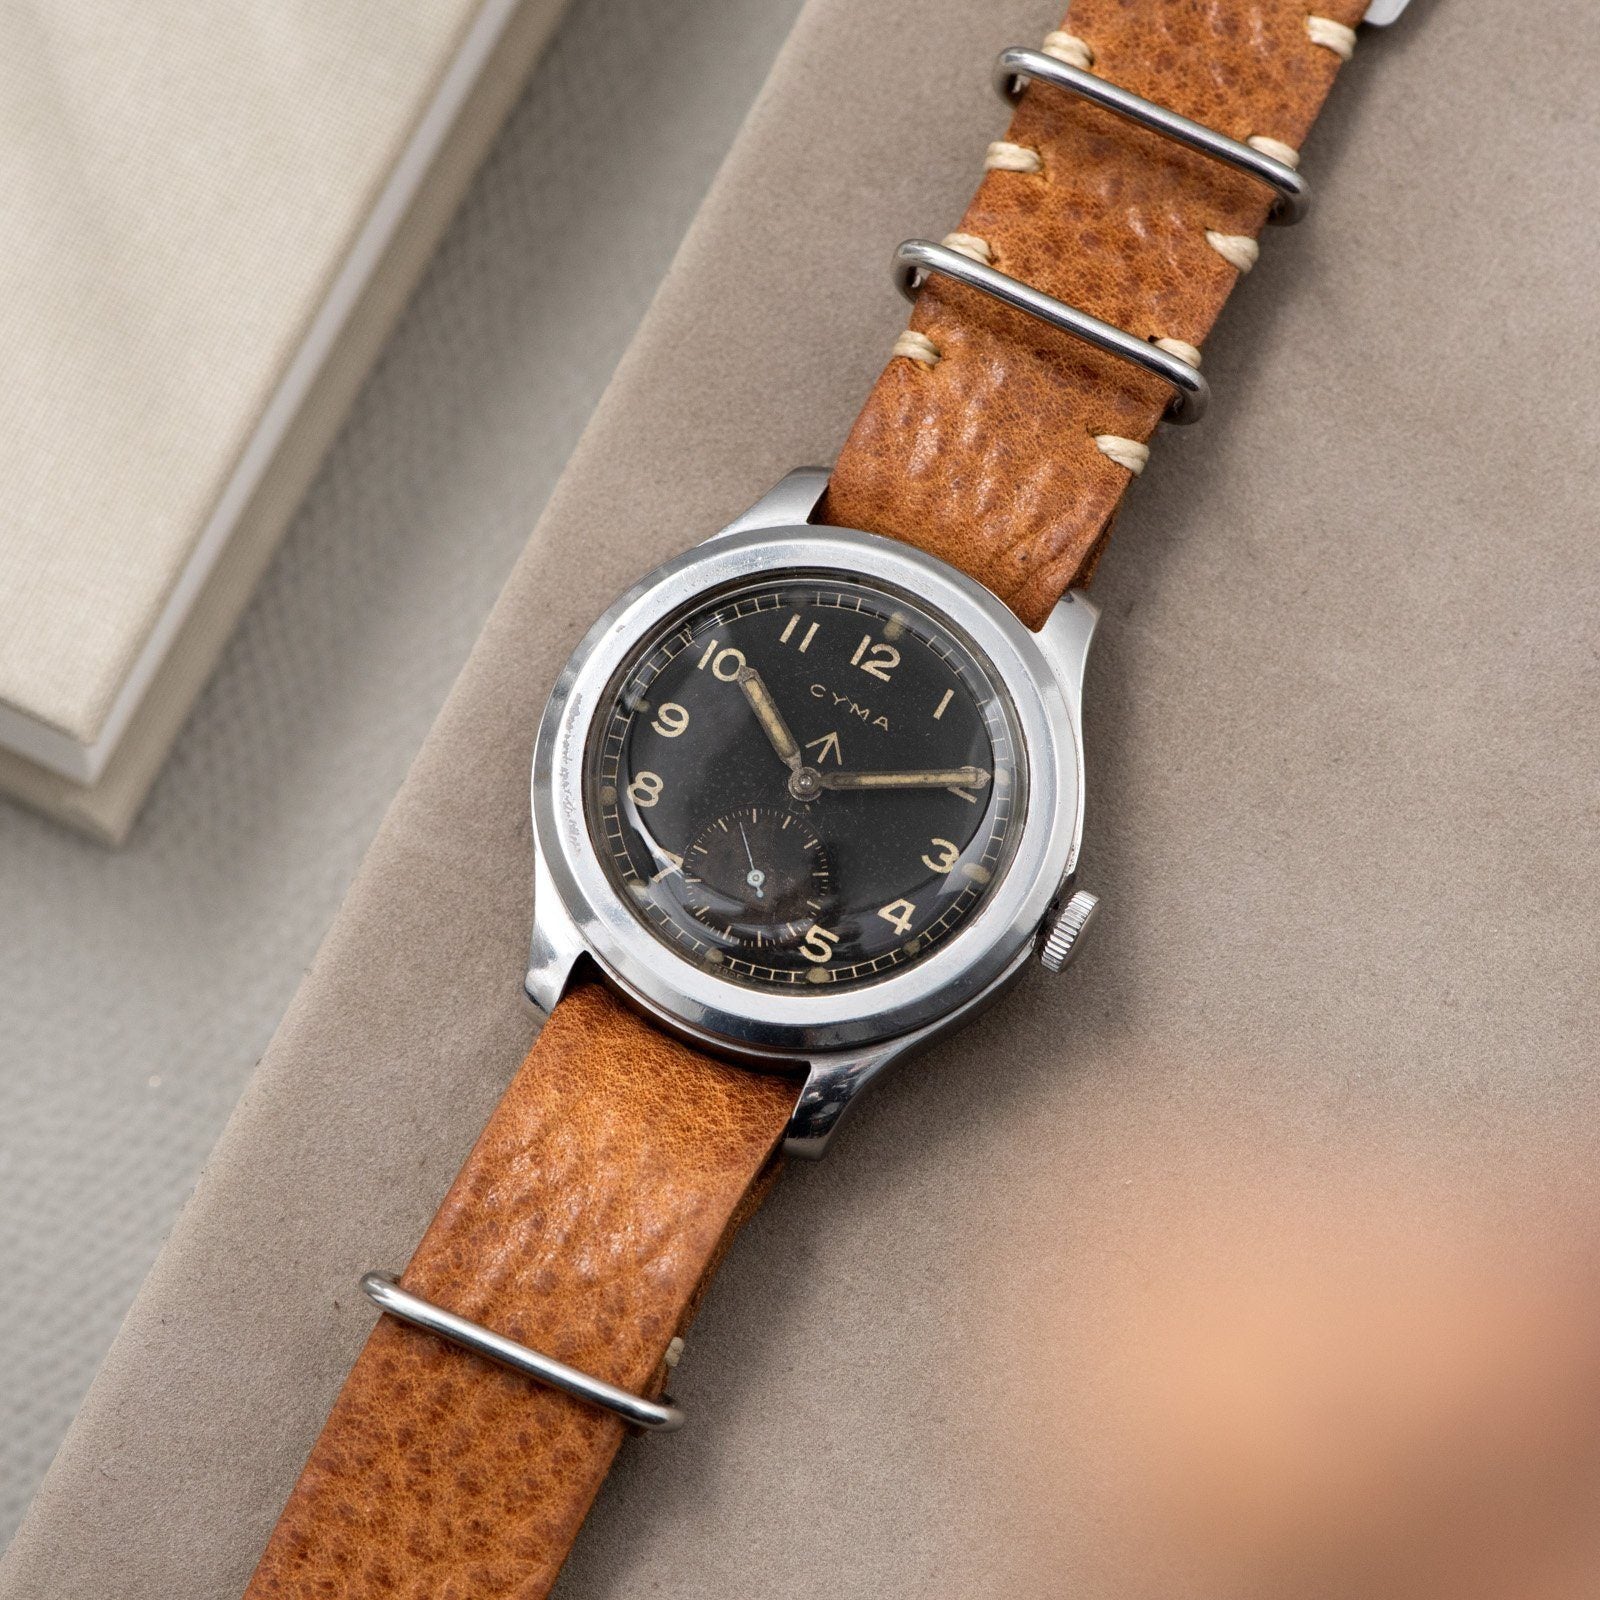 Cyma Issued Military Watch 1940s